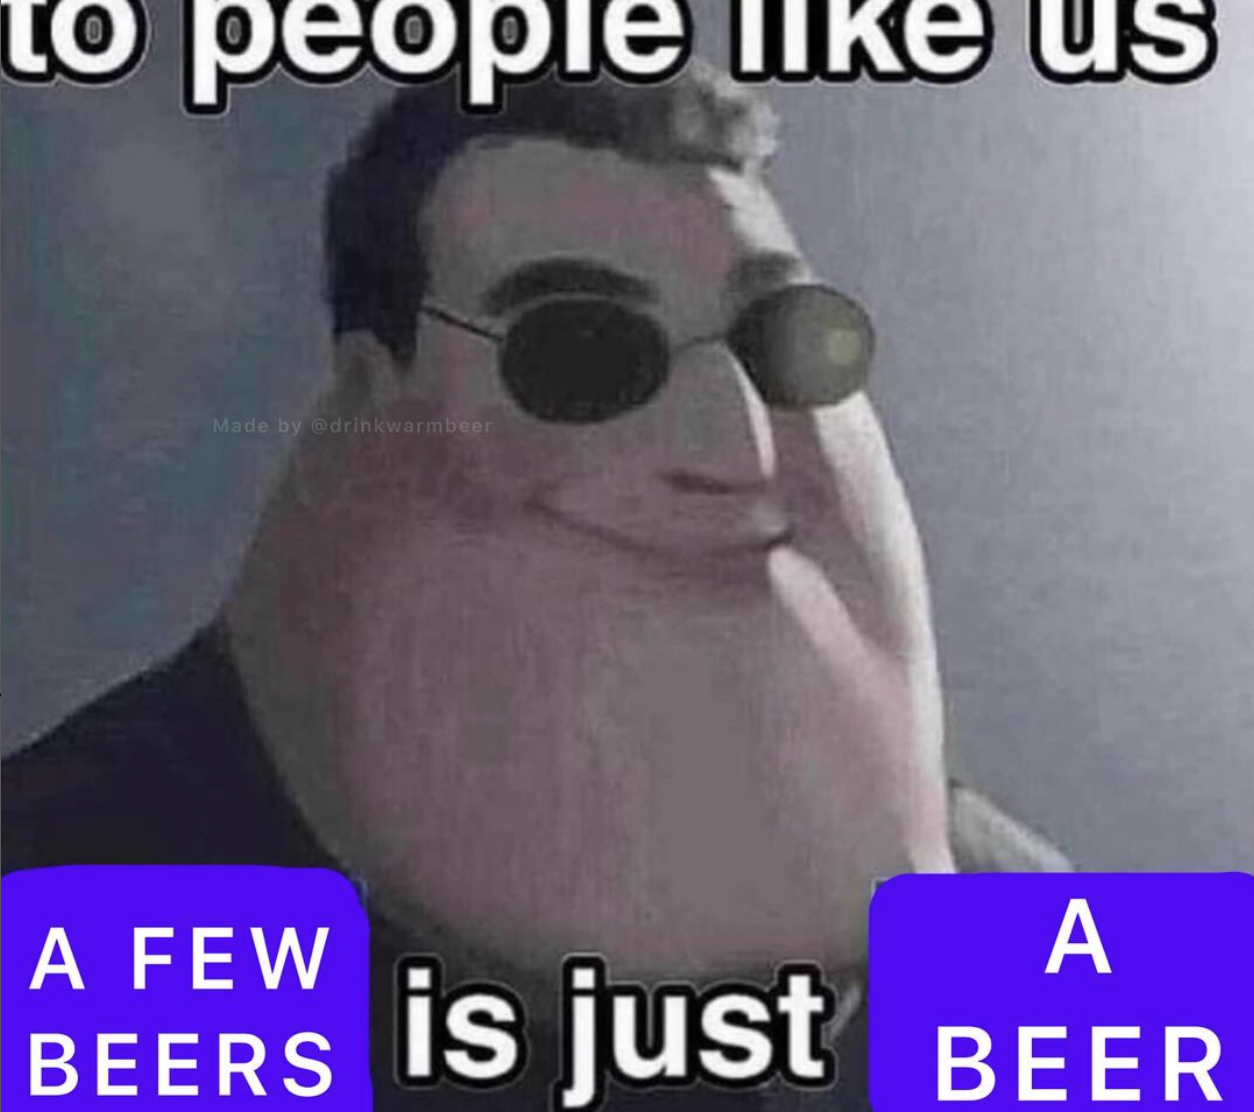 photo caption - to people lik e us Maile by drinkwarmbar A Few A Beers is just Beer